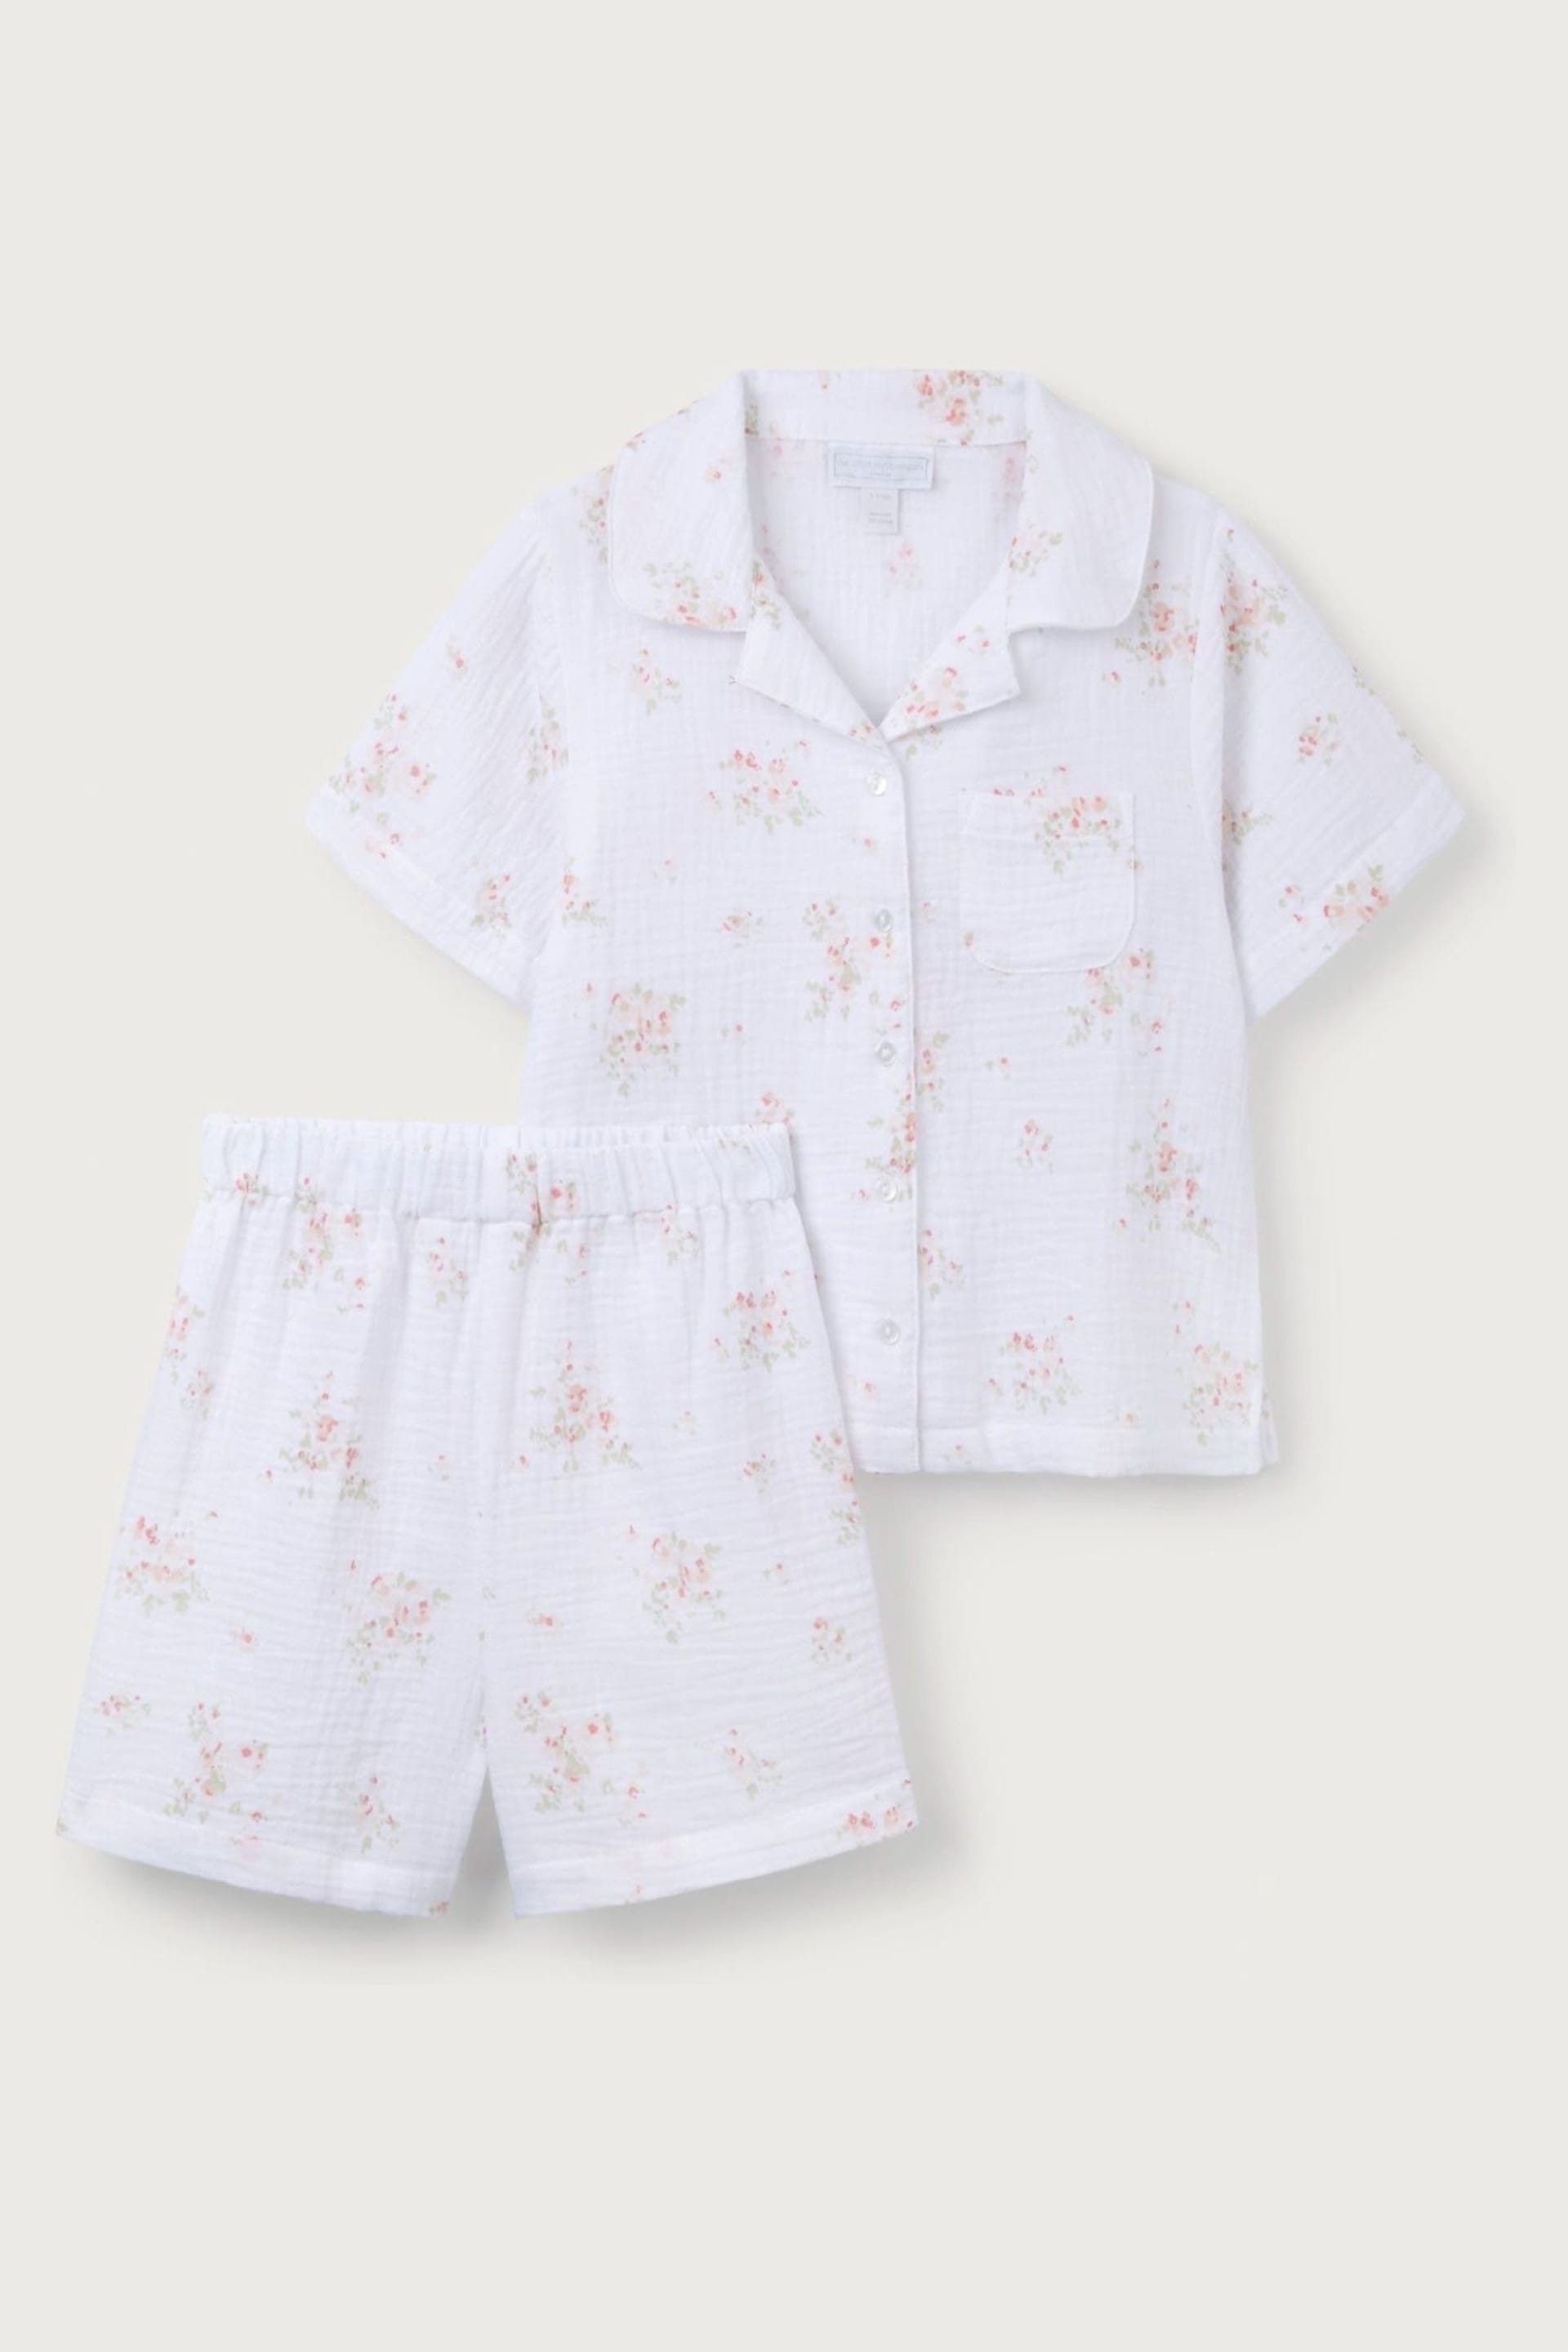 The White Company Cotton Vintage Floral Classic Shortie White Pyjamas - Image 6 of 6